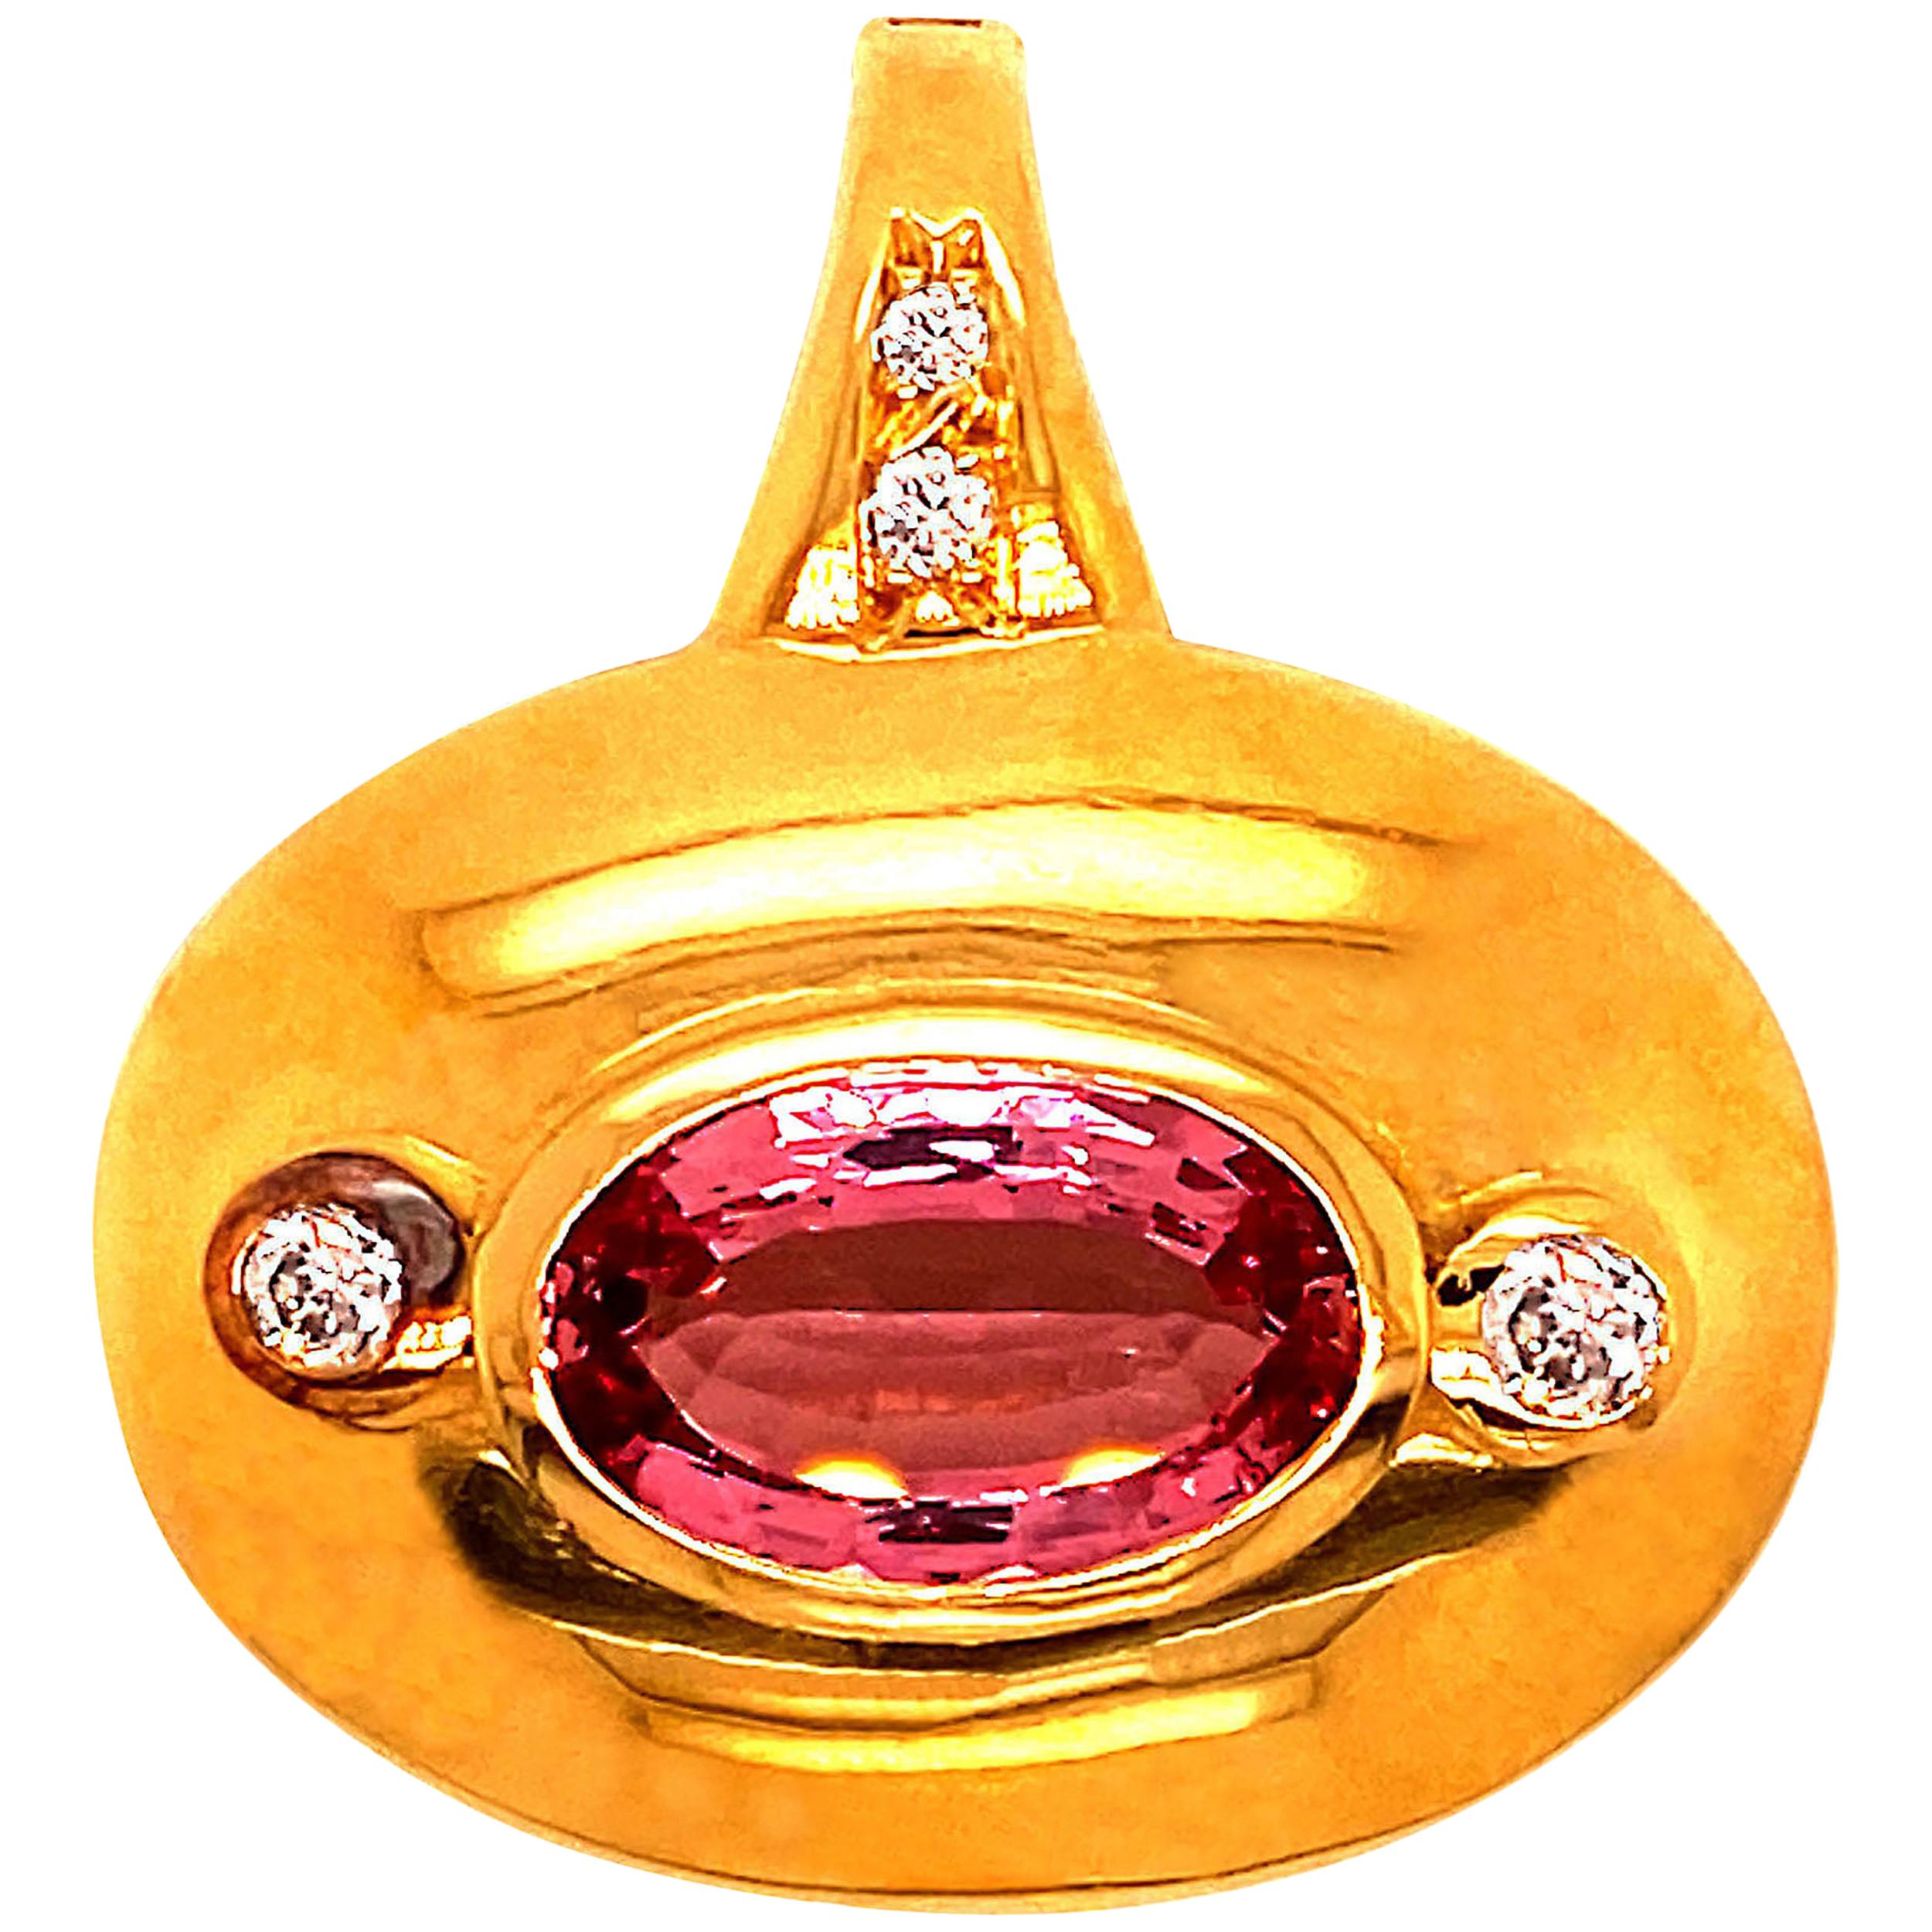 This one of a kind pendant was hand made in Rio de Janeiro with a gorgeous brazilian Tourmaline. Large 18K rich yellow gold shield style pendant featuring an east-west set light-medium color, oval step cut pink Tourmaline, 14 X 9 X 5 MM, est 4.6 ct